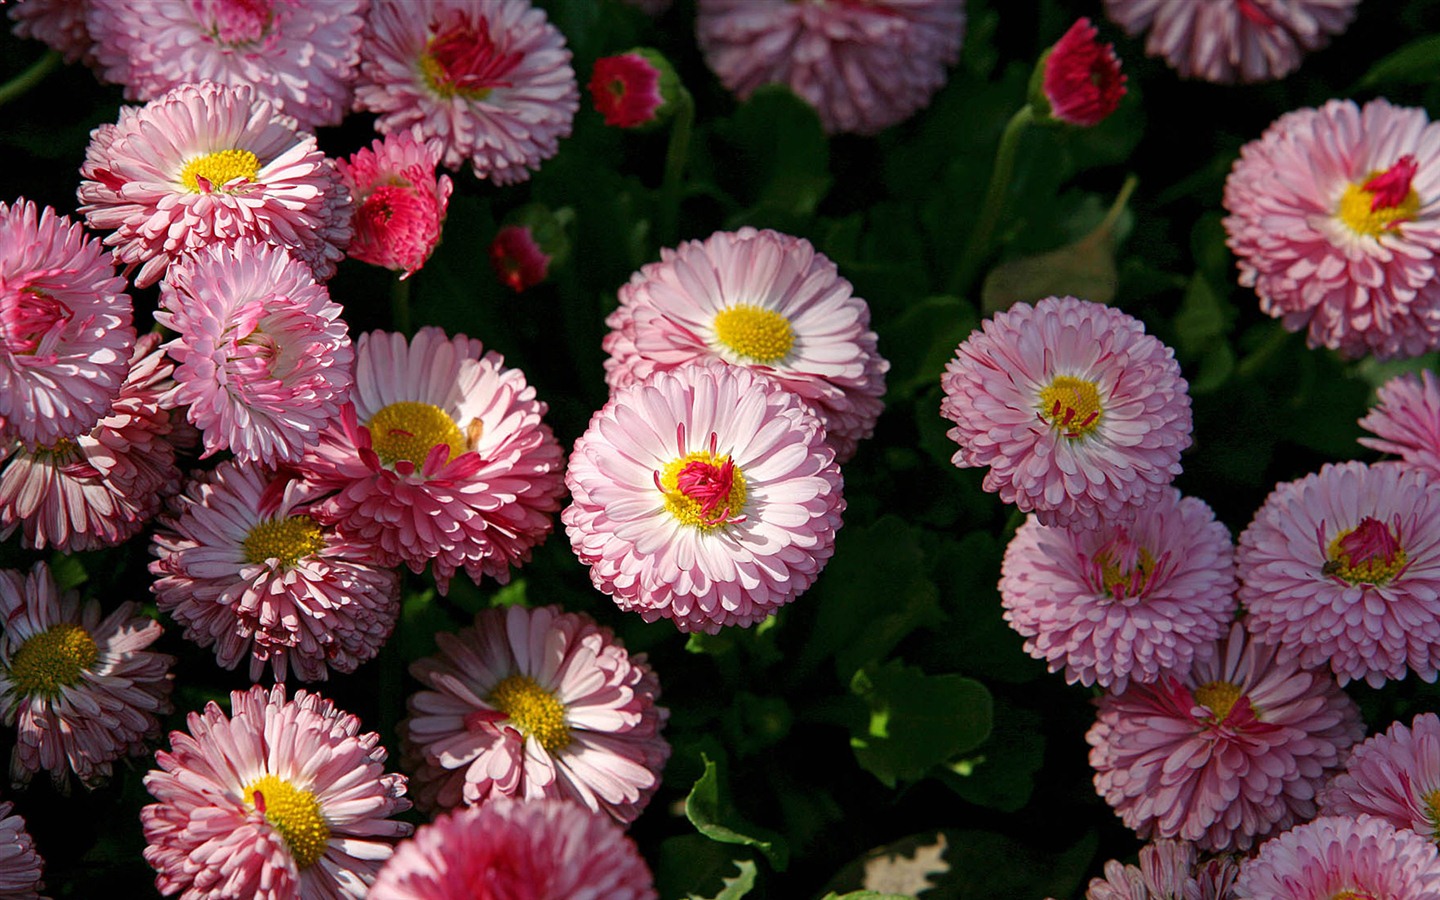 Daisies flowers close-up HD wallpapers #16 - 1440x900